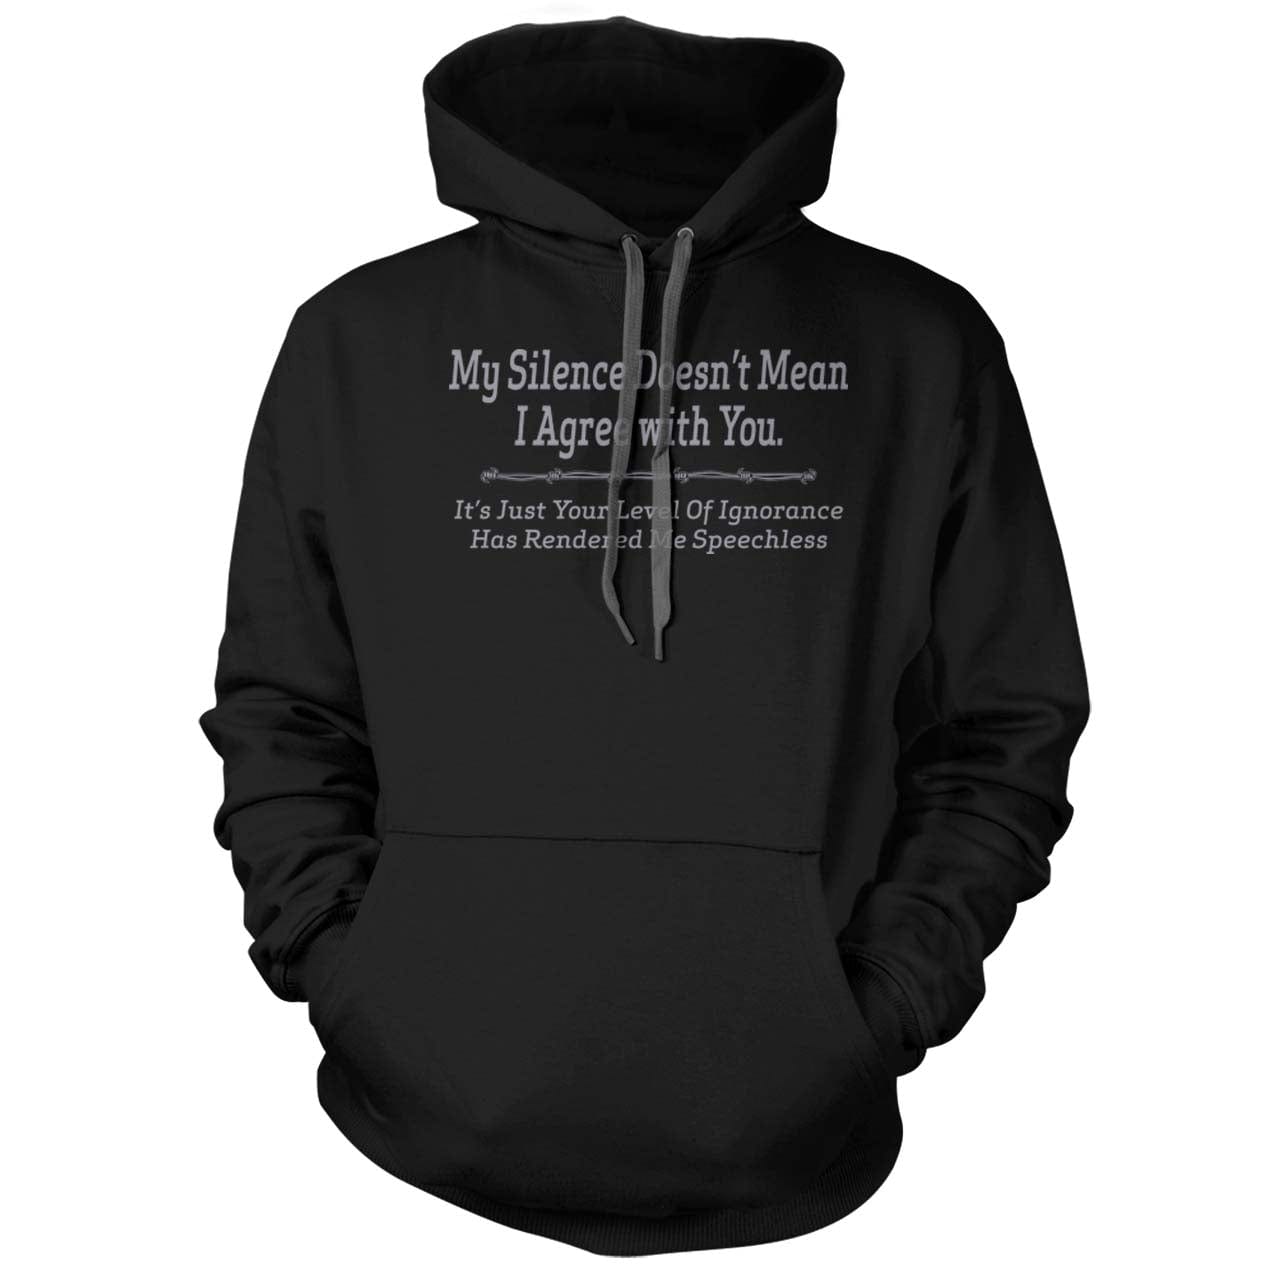 My Silence does not mean I agree with you Hoodie